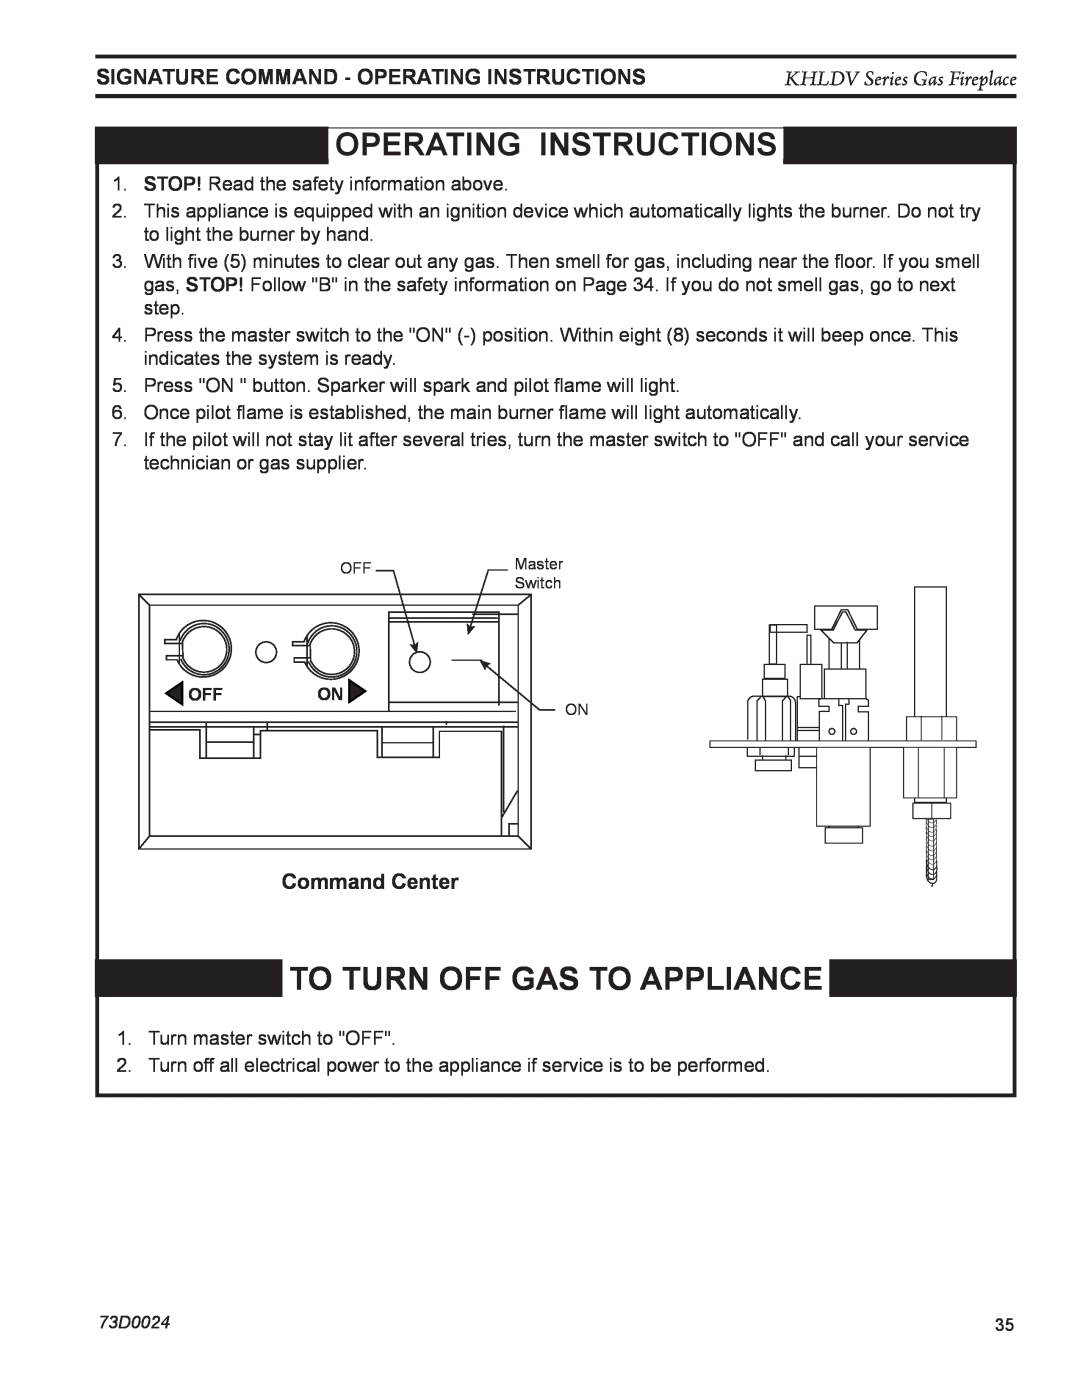 Monessen Hearth KHLDV400, KHLDV500 OPERATing INSTRUCTIONS, To Turn Off Gas To Appliance, Command Center 